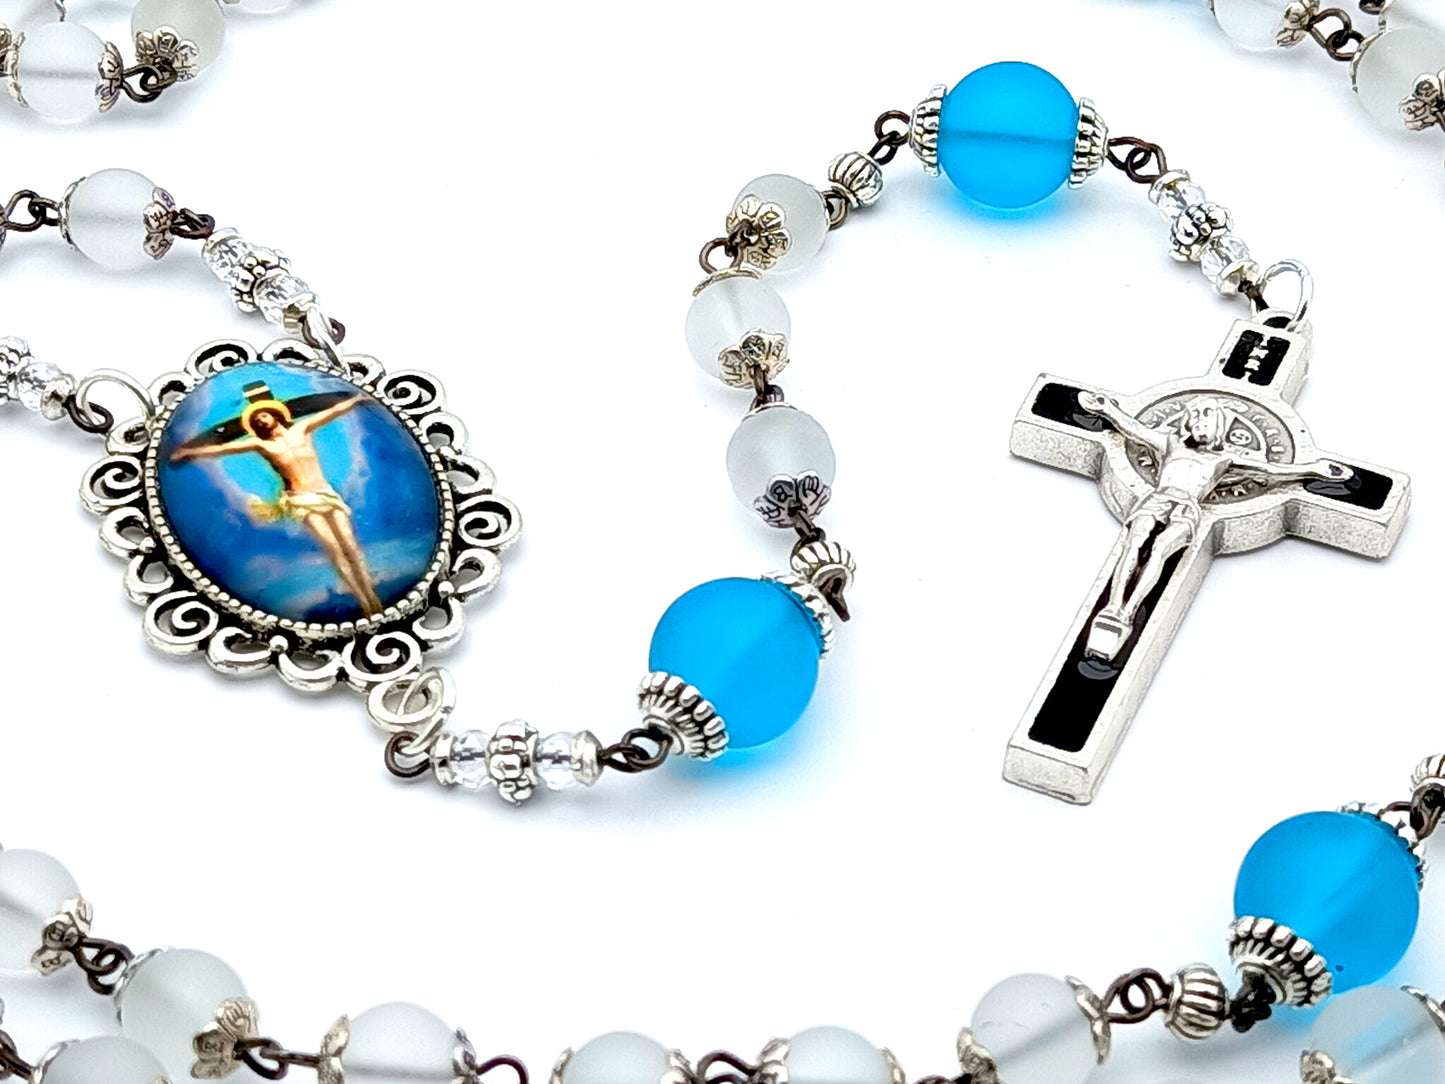 The Crucifixion unique rosary beads with frosted clear and blue glass beads, black and silver enamel crucifix and picture centre medal.